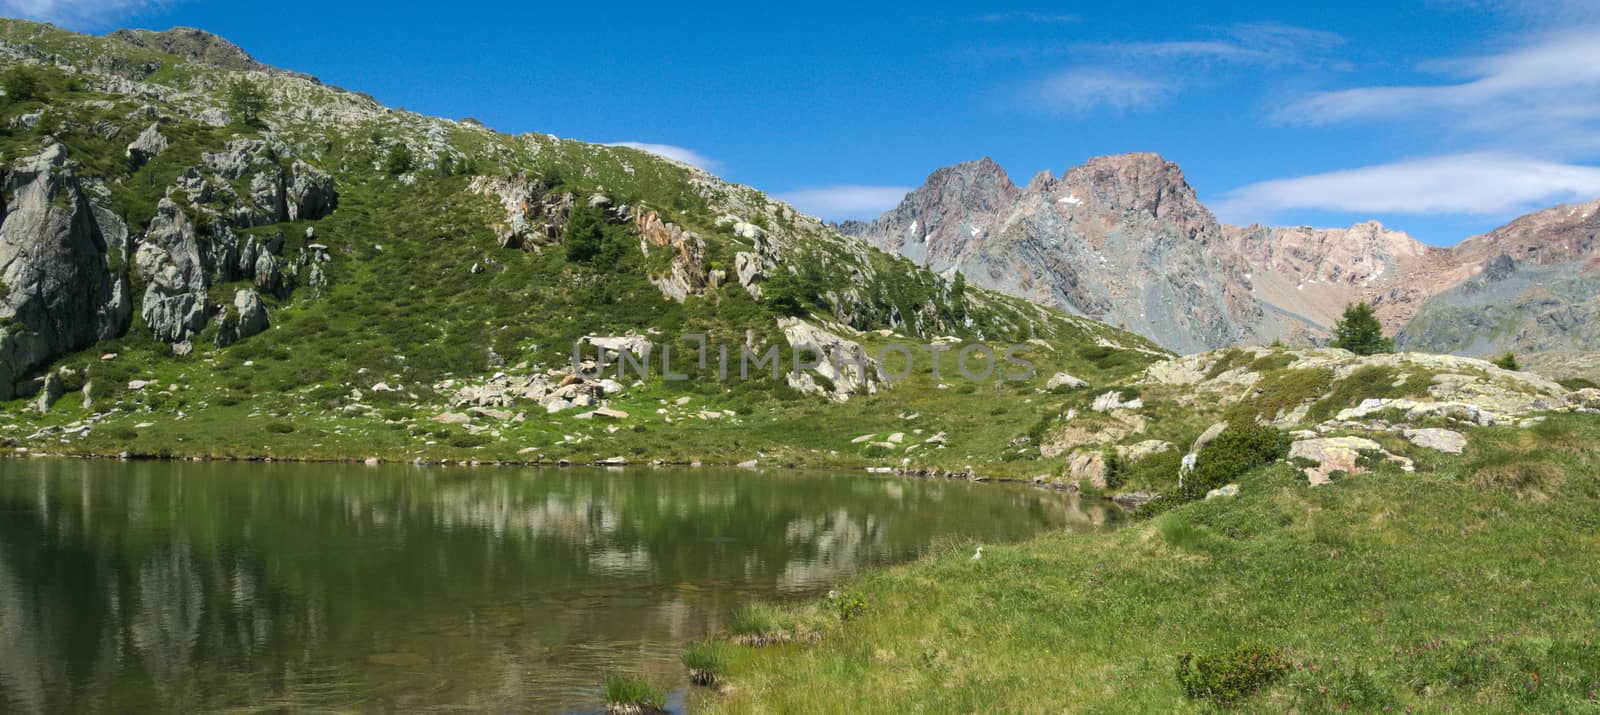 Small lake on the Italian alps
 by gigidread